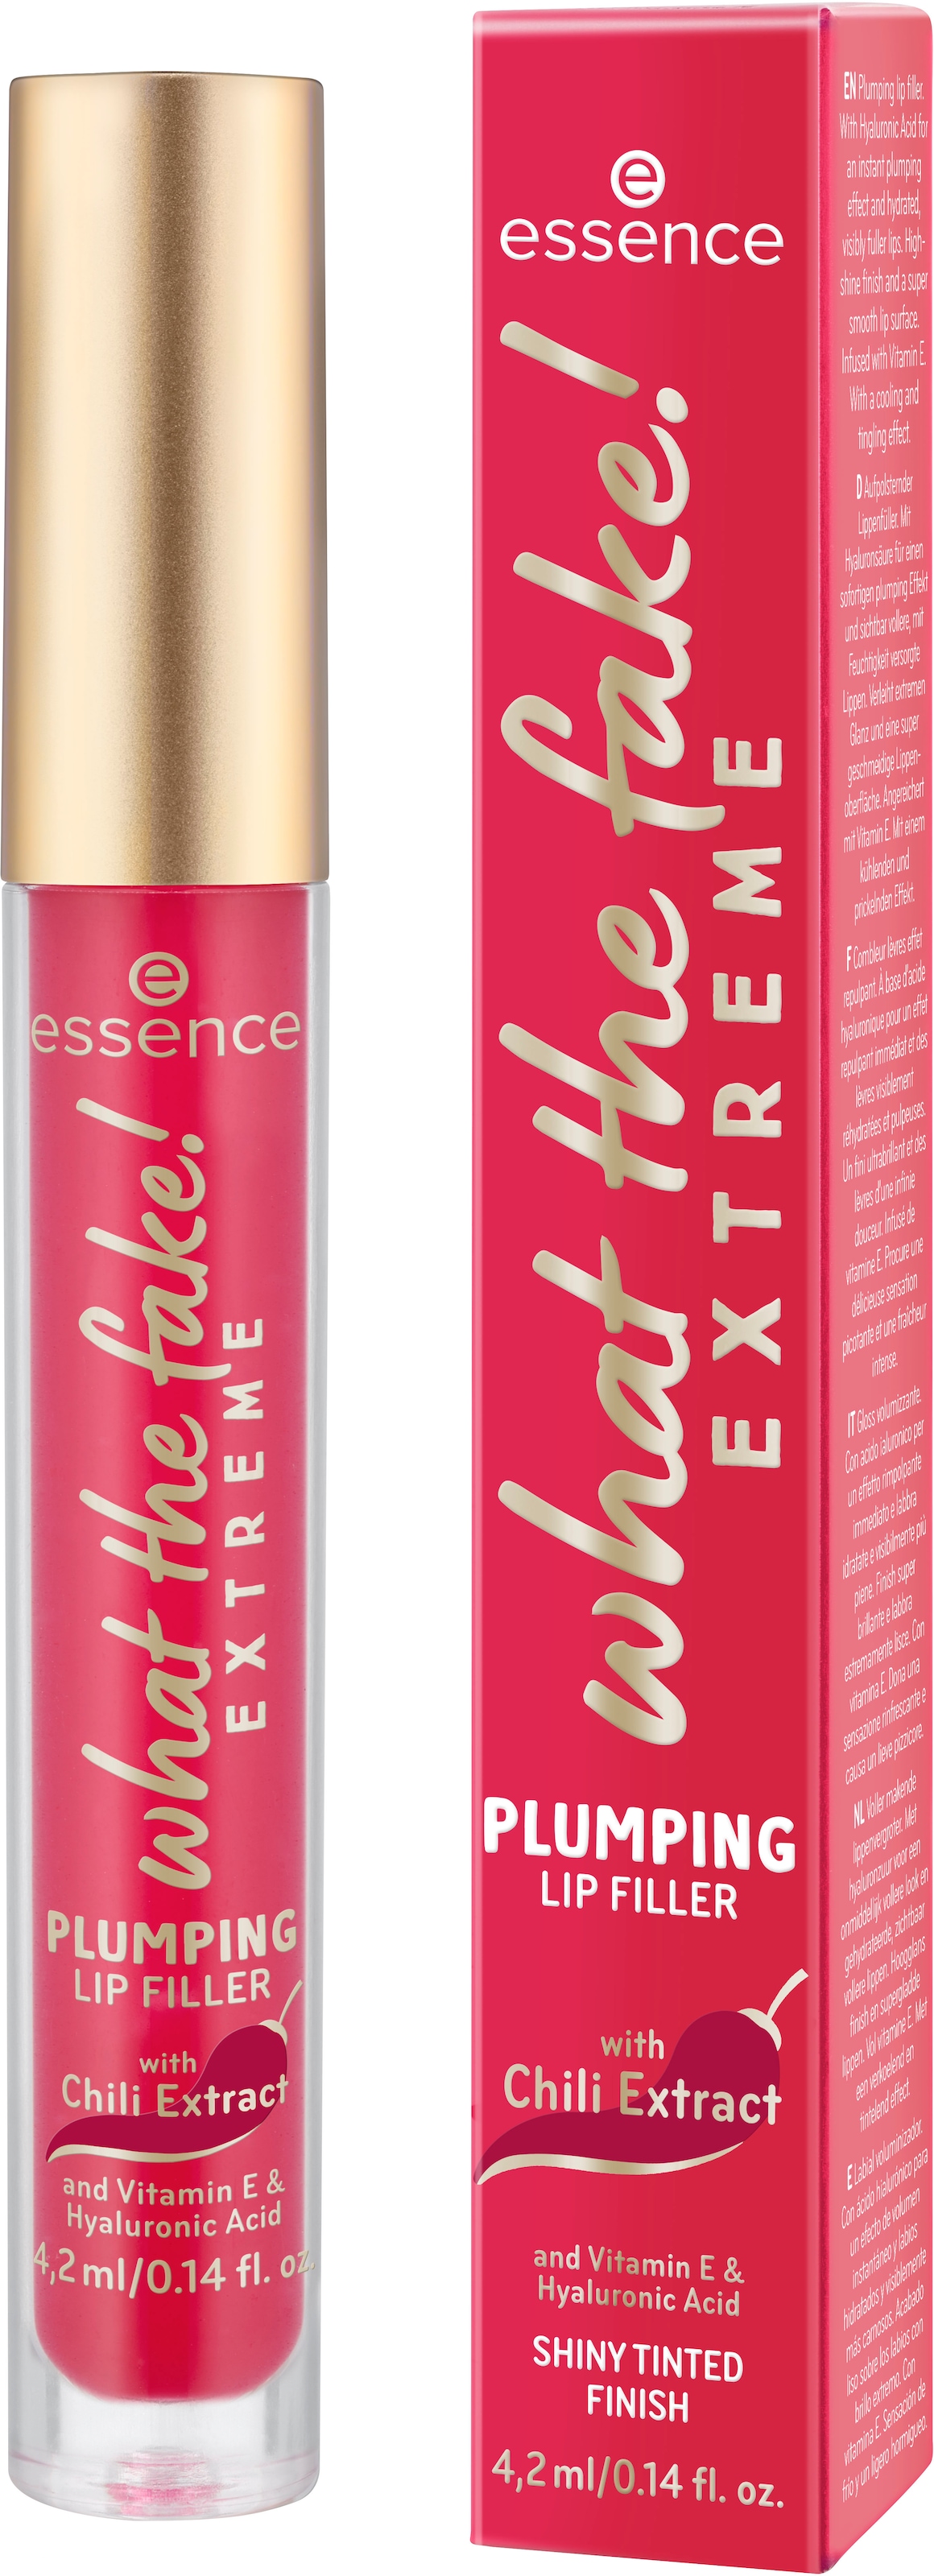 Essence Lip-Booster »what 3 bei tlg.) ♕ FILLER«, the LIP PLUMPING (Set, fake! EXTREME